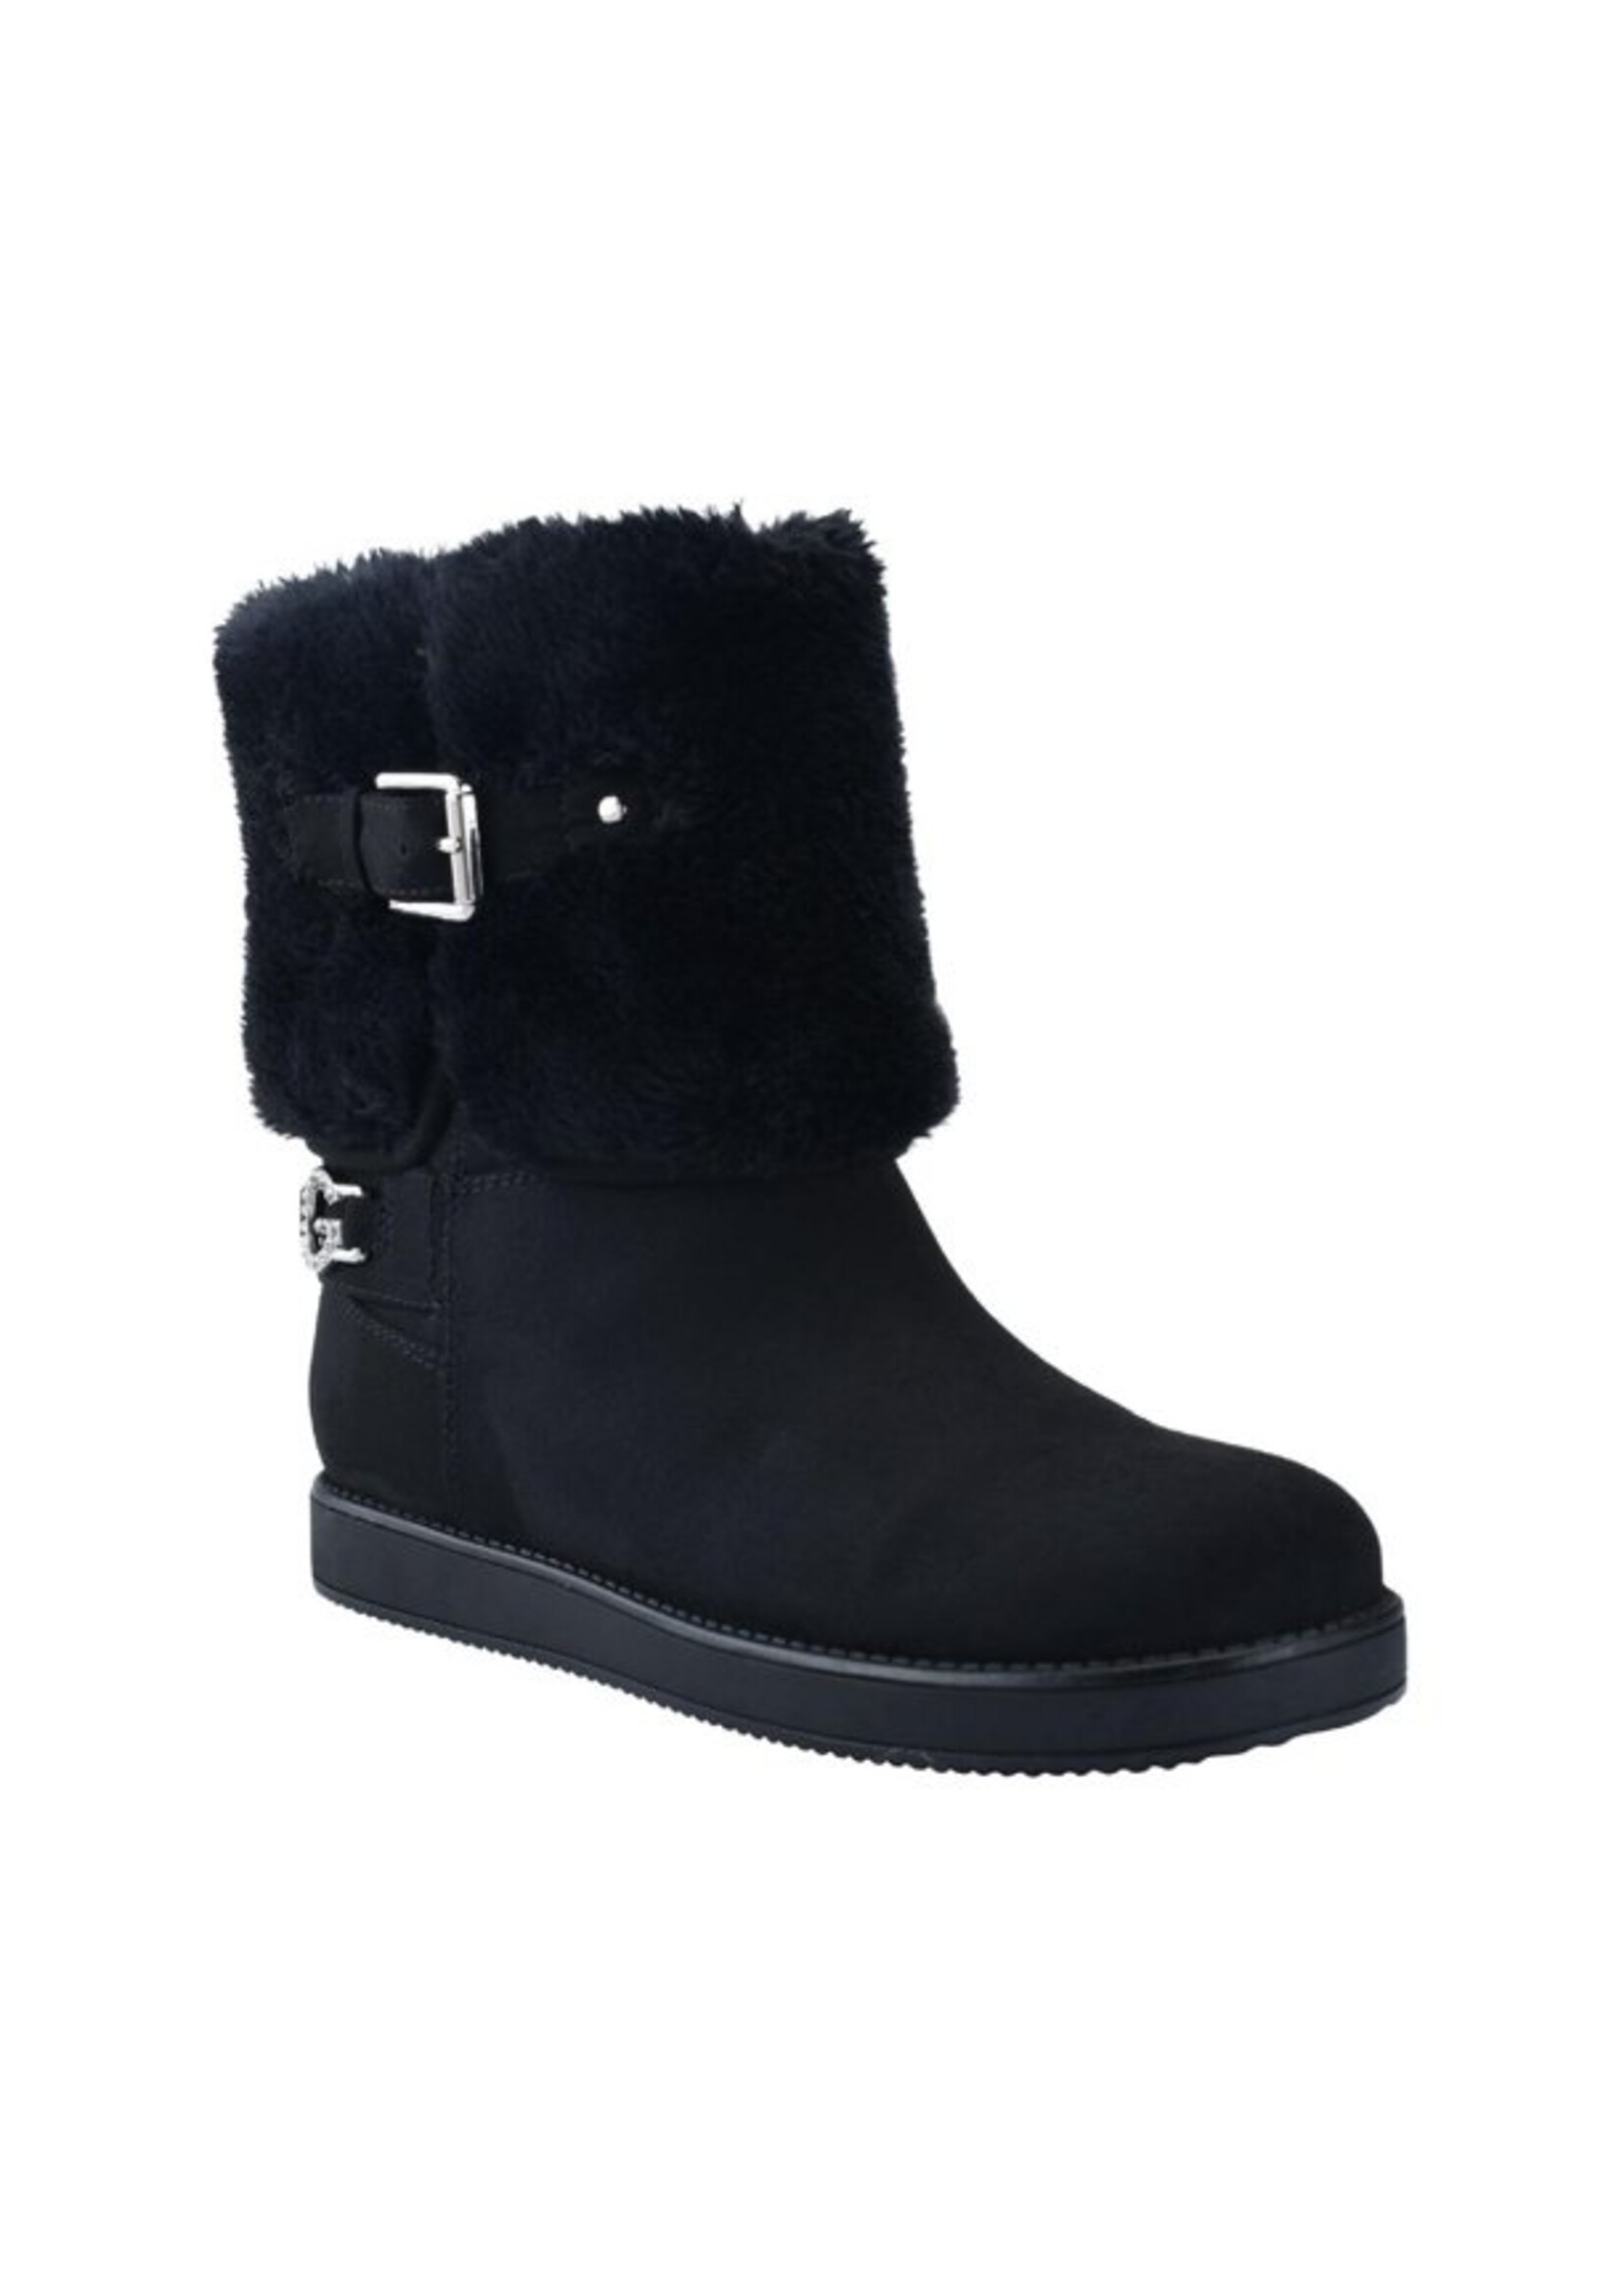 GBG Los Angeles GBG Los Angeles Women's Faux Suede Cold Weather Ankle Boots